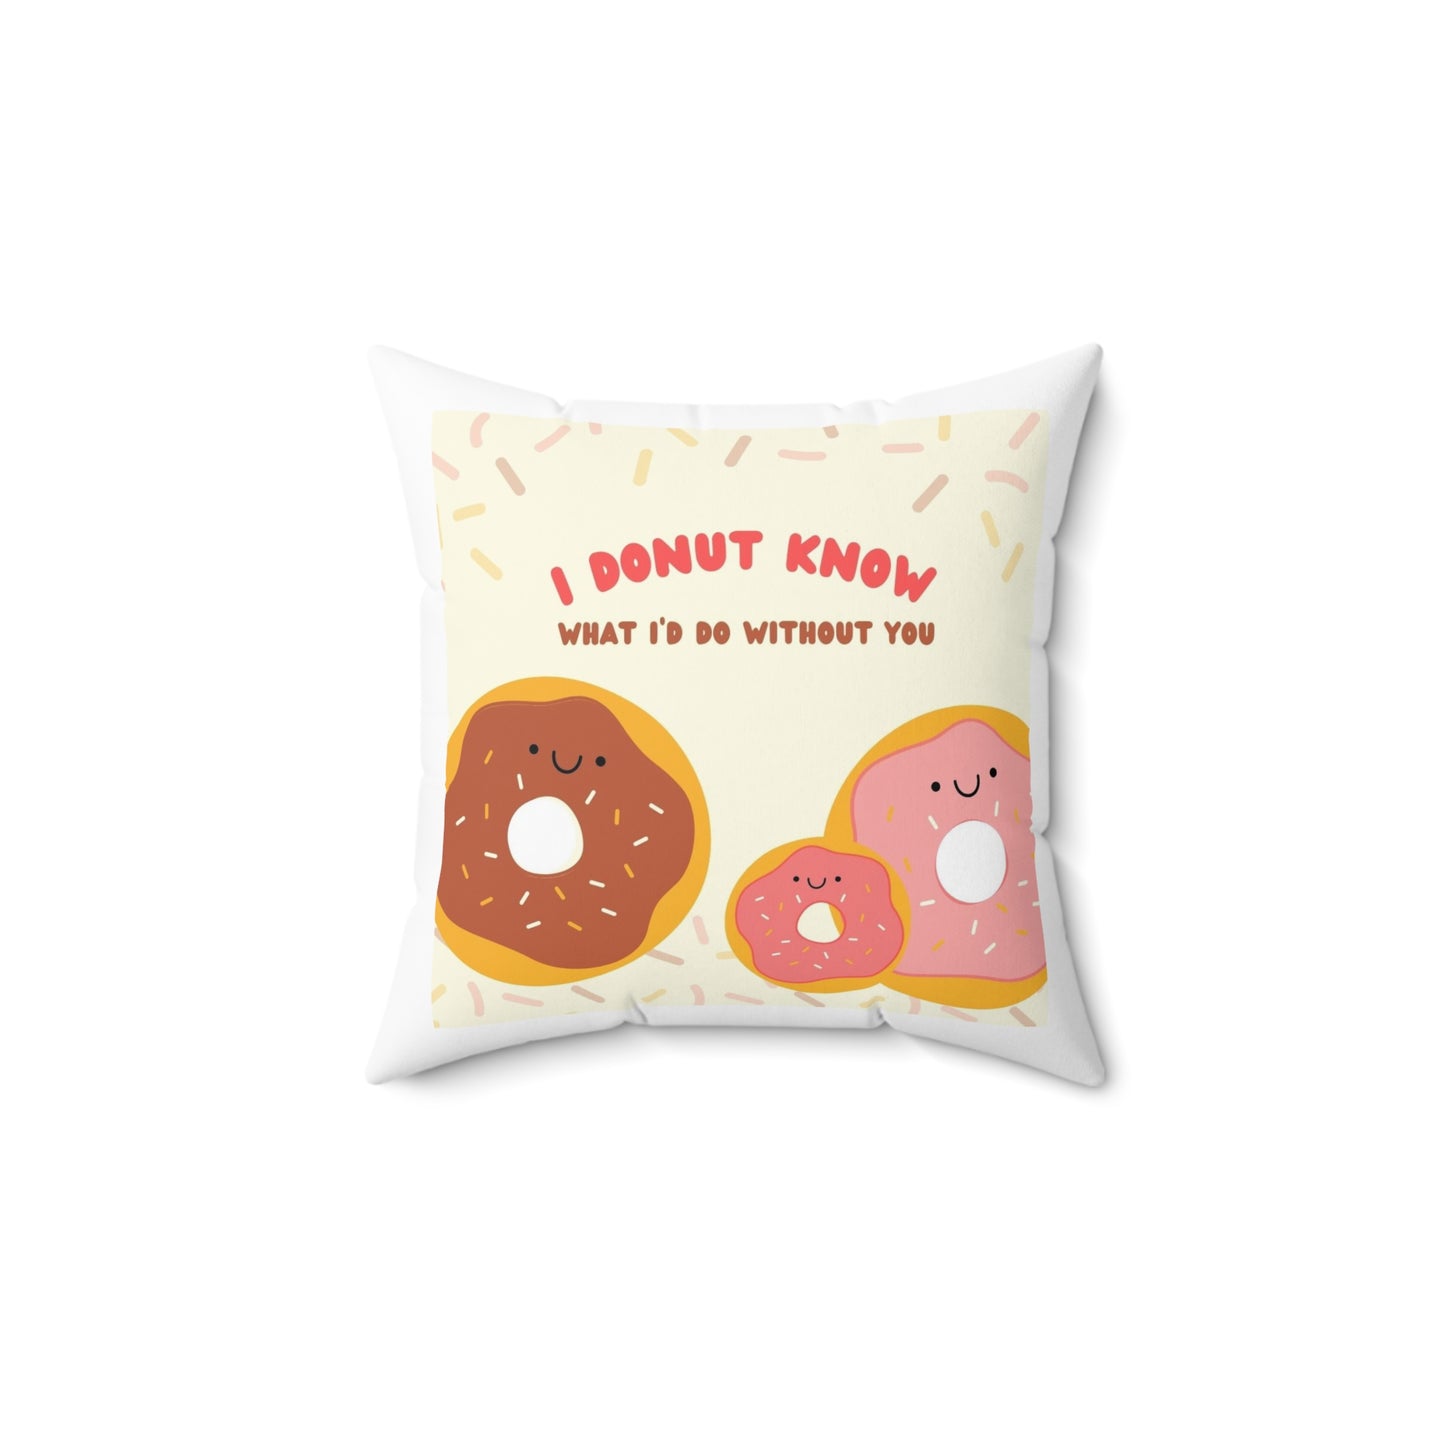 "I Donut Know" Faux Suede Square Pillow